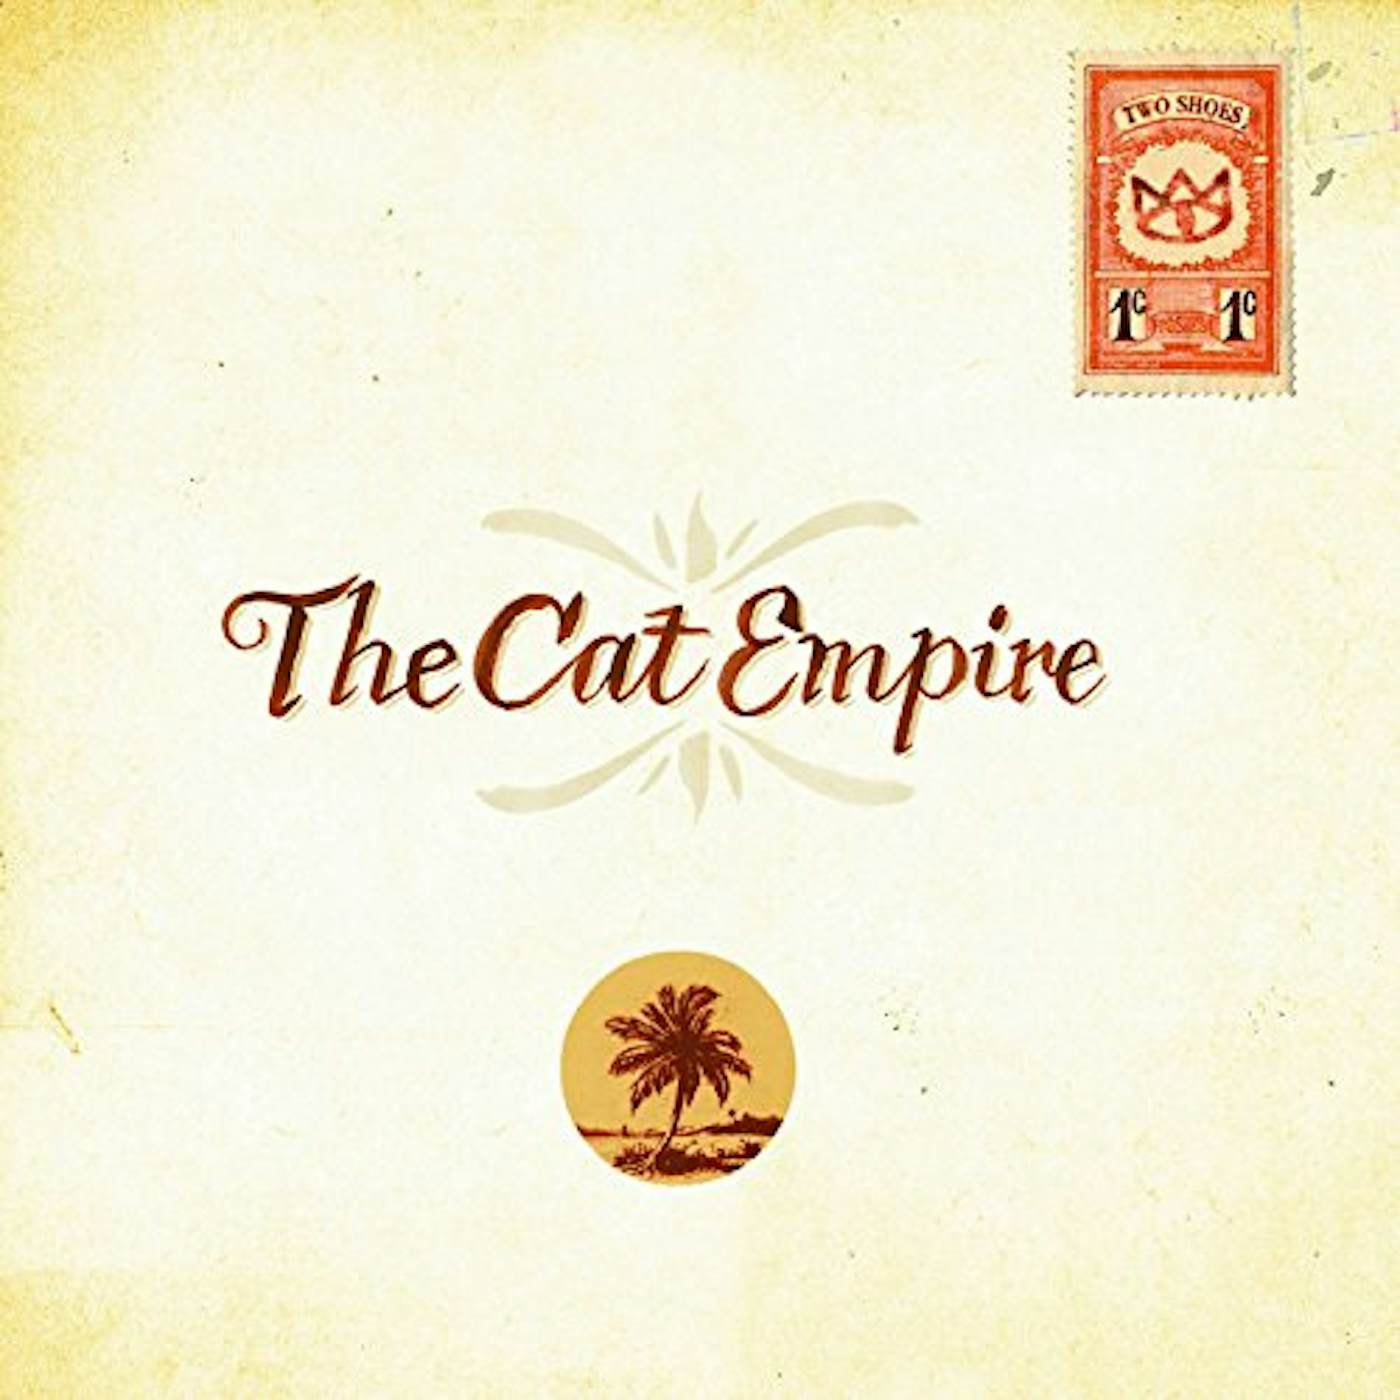 The Cat Empire Two Shoes Vinyl Record